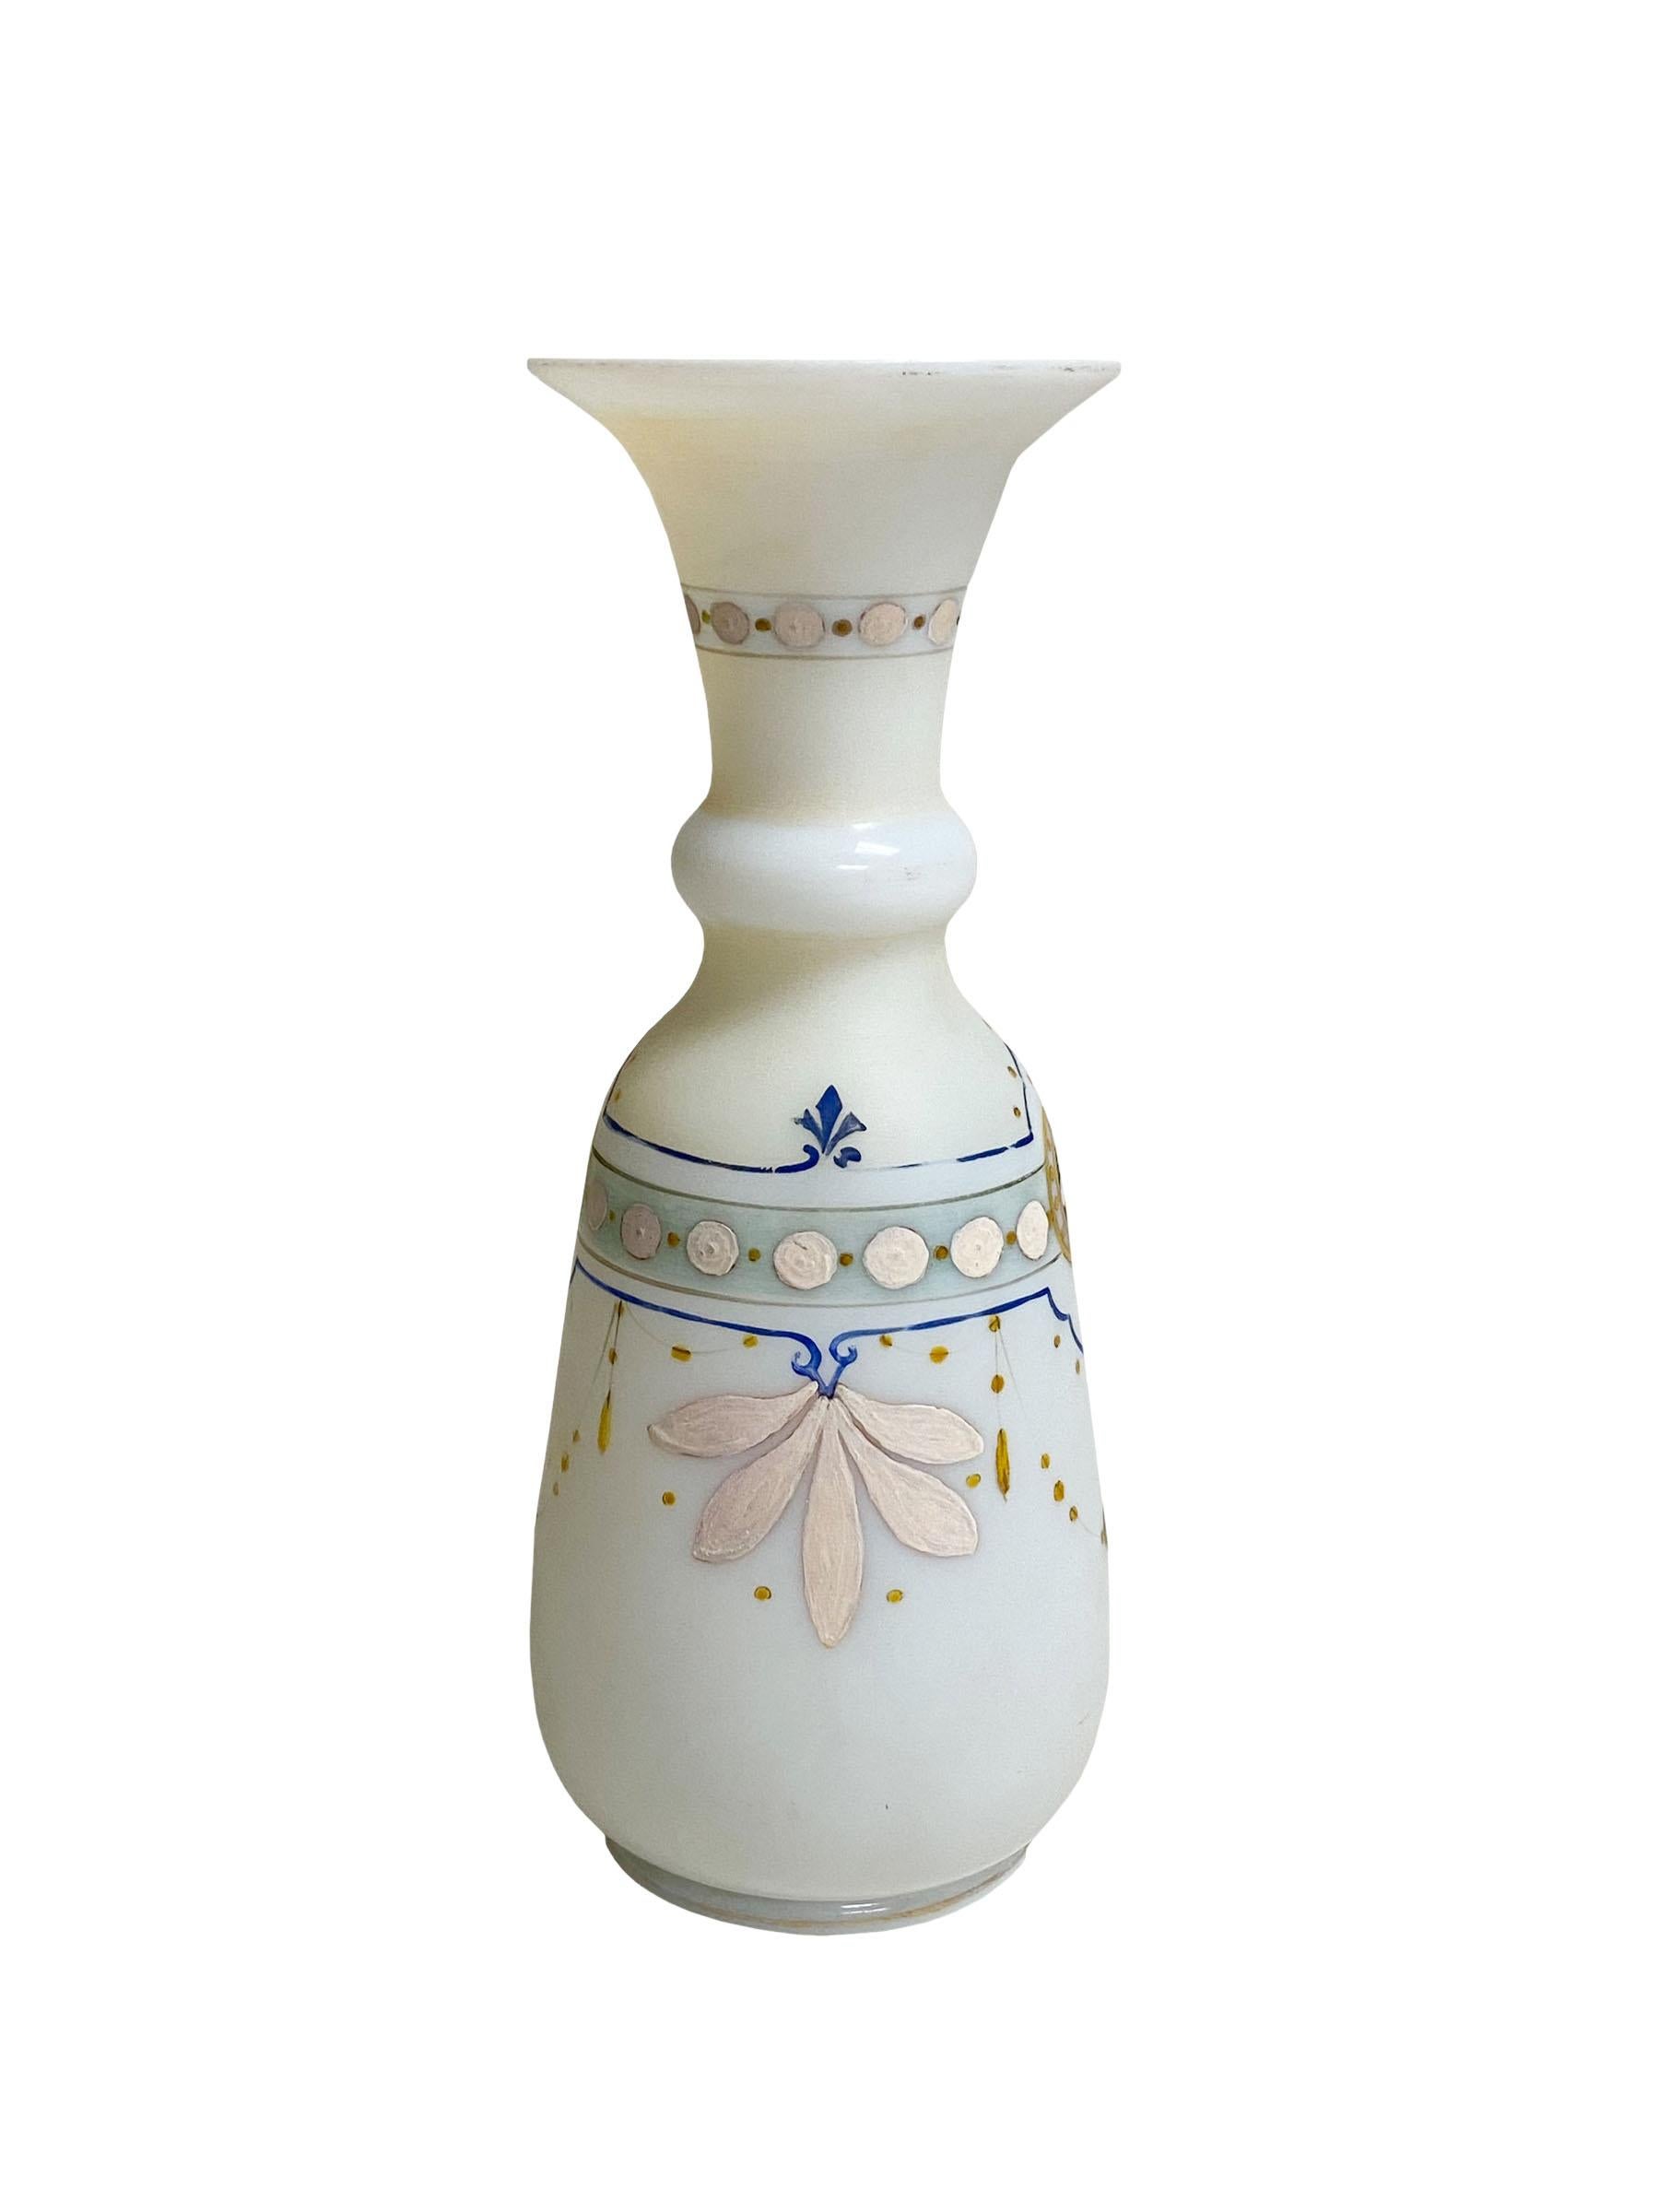 A delightful French hand painted opaline vase. Very delicately painted design of garlands in gold, blue and cream accents.